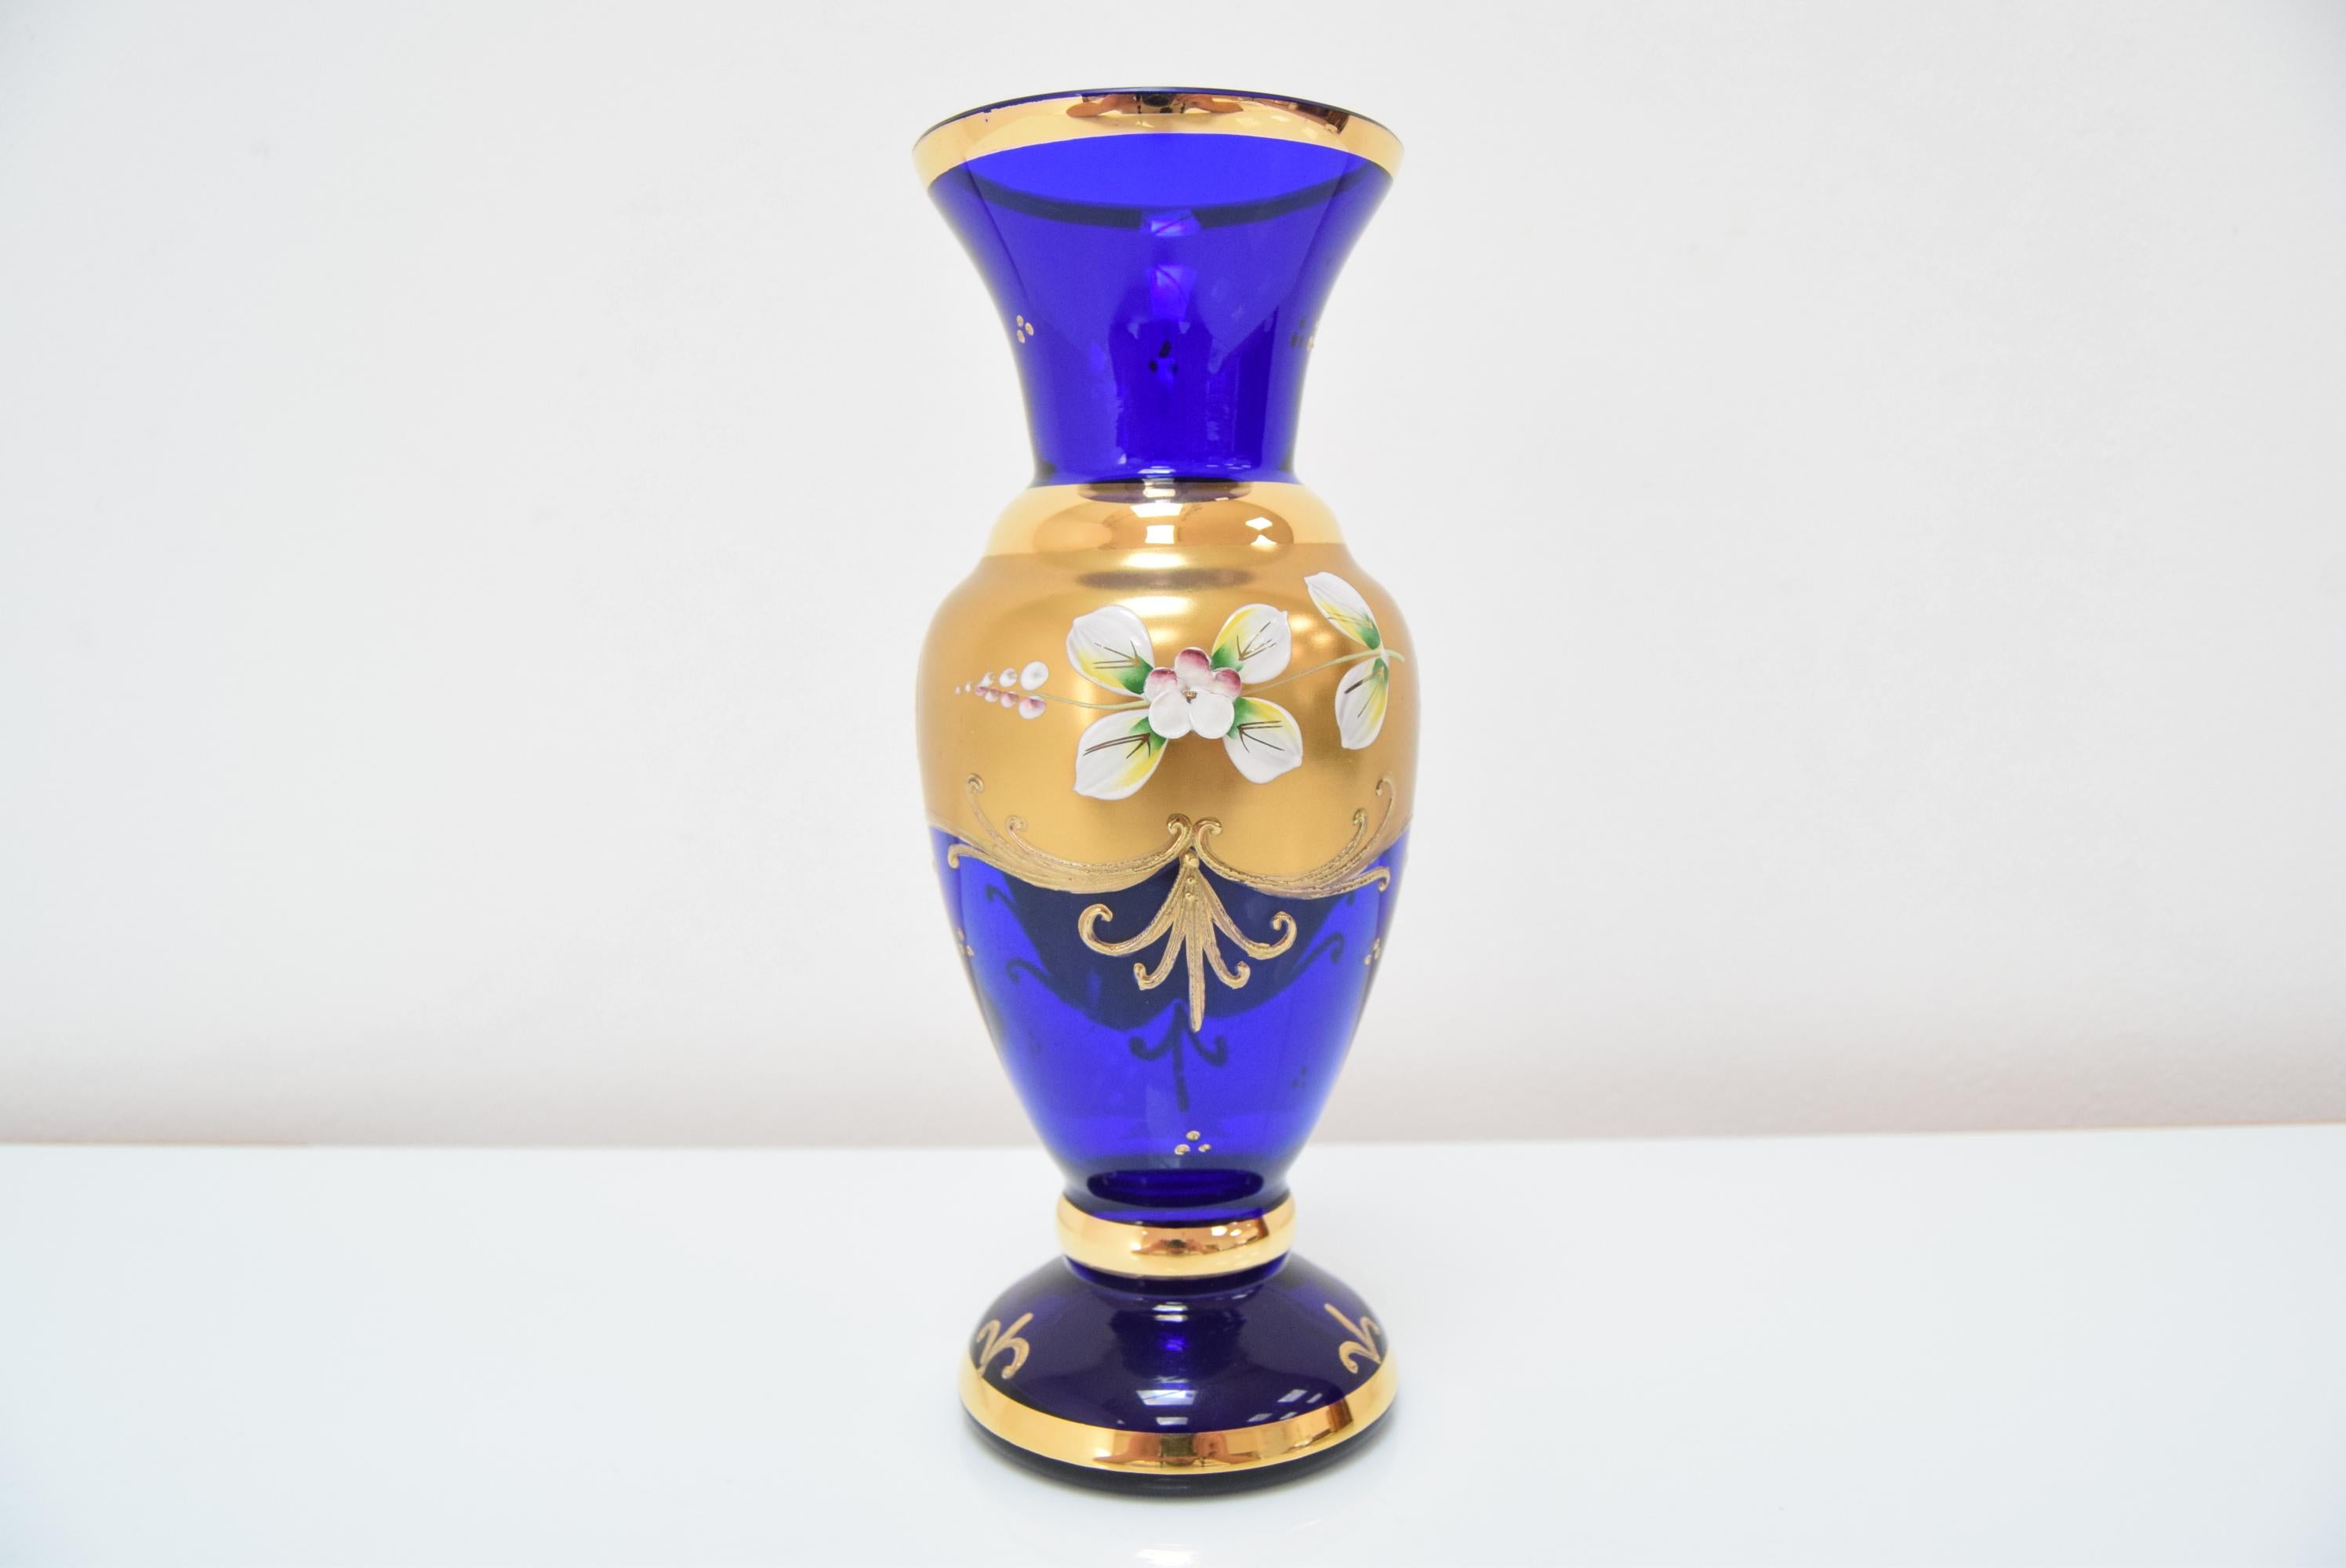 Made in Czechoslovakia
Made of art glass, gold
Re-polished
Original condition.